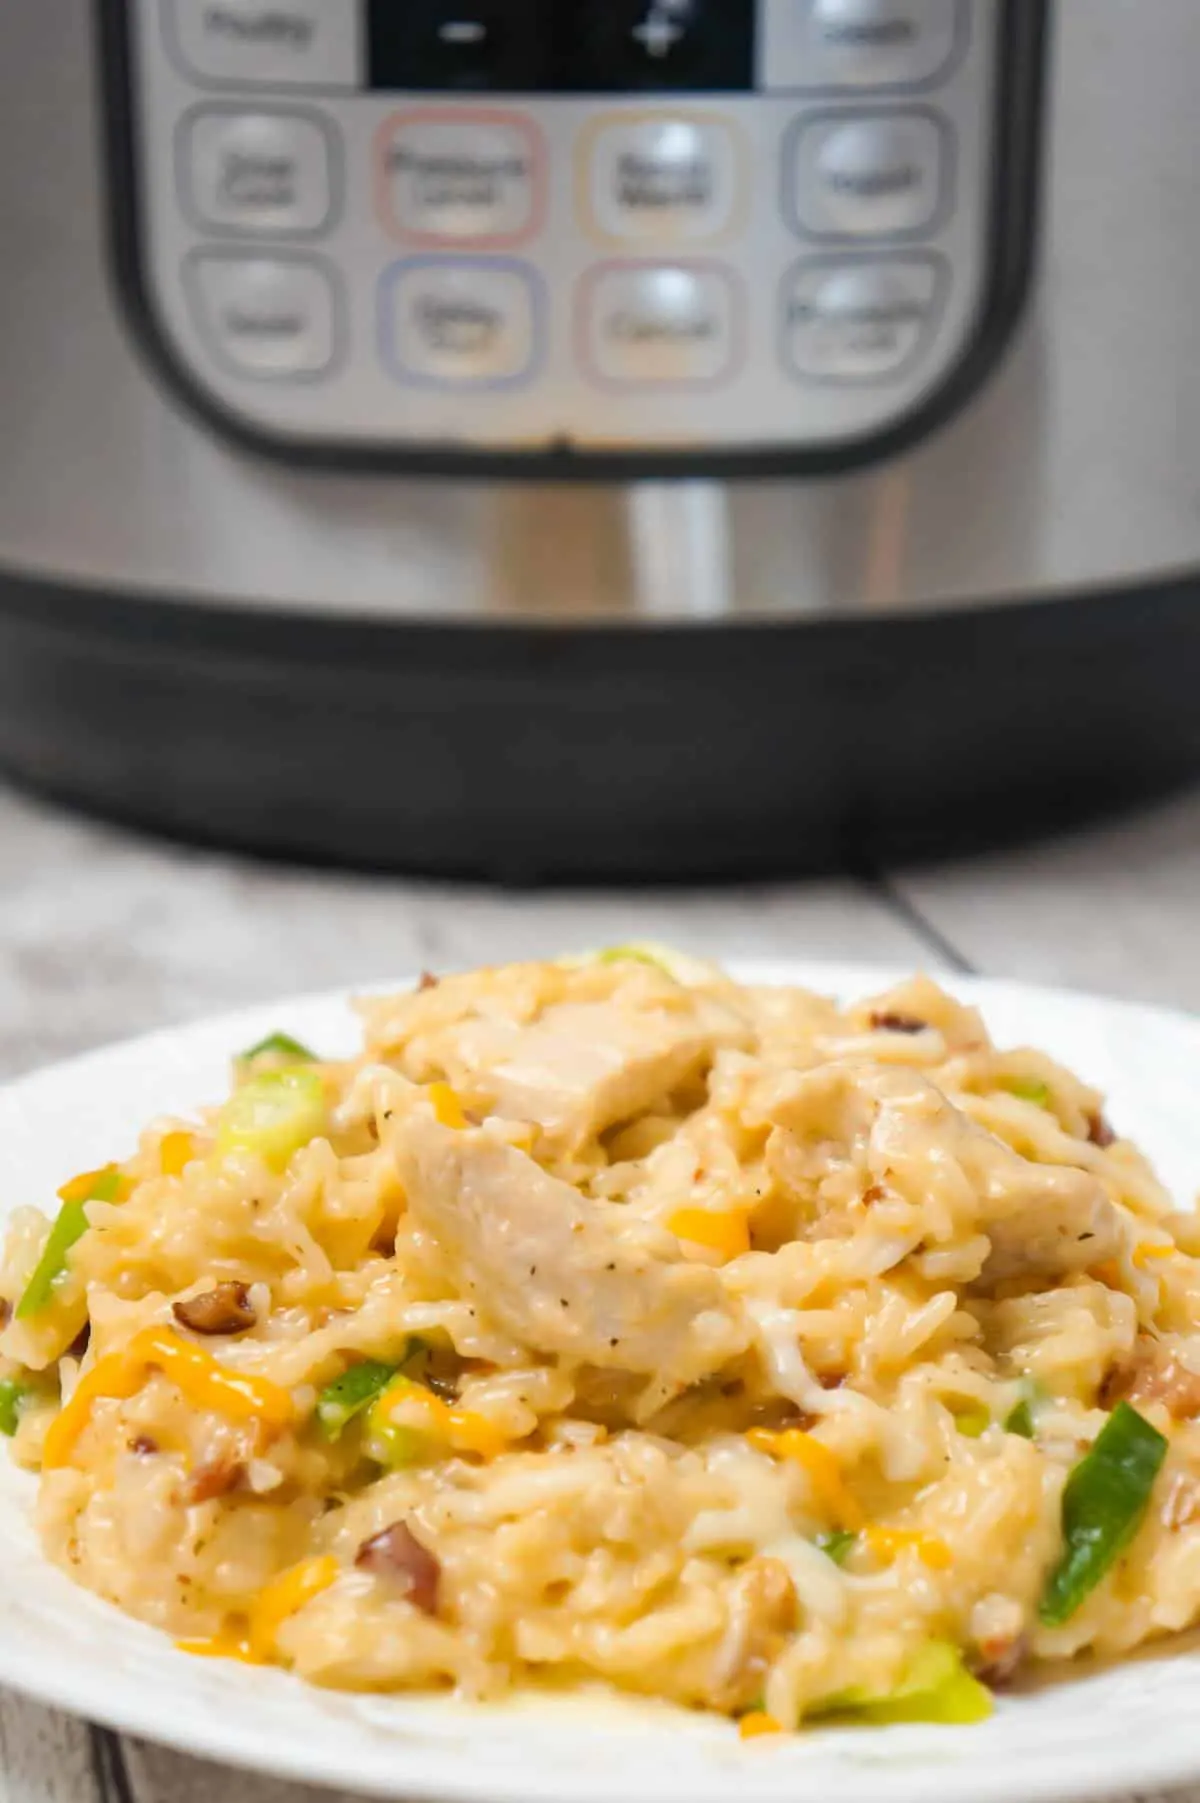 Instant Pot Cheddar Bacon Ranch Chicken and Rice is an easy pressure cooker dinner recipe loaded with chicken breast chunks, crumbled bacon and shredded cheddar cheese.